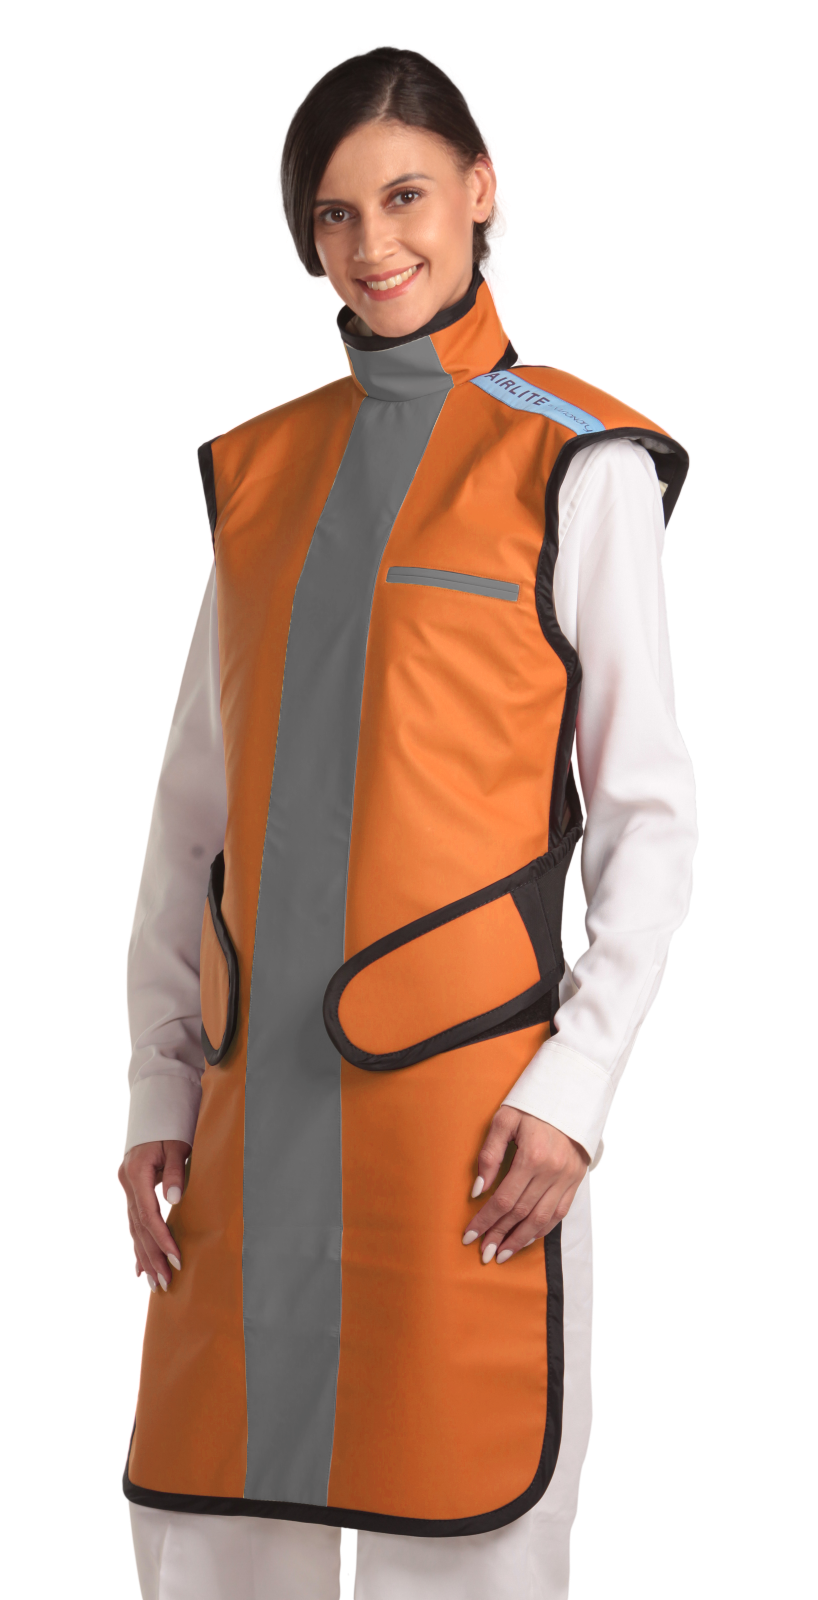 Frontal left-side view of a female model wearing a coat apron with an integrated thyroid guard. The apron is orange with a grey-colored center line and has velcro fasteners by the sides.